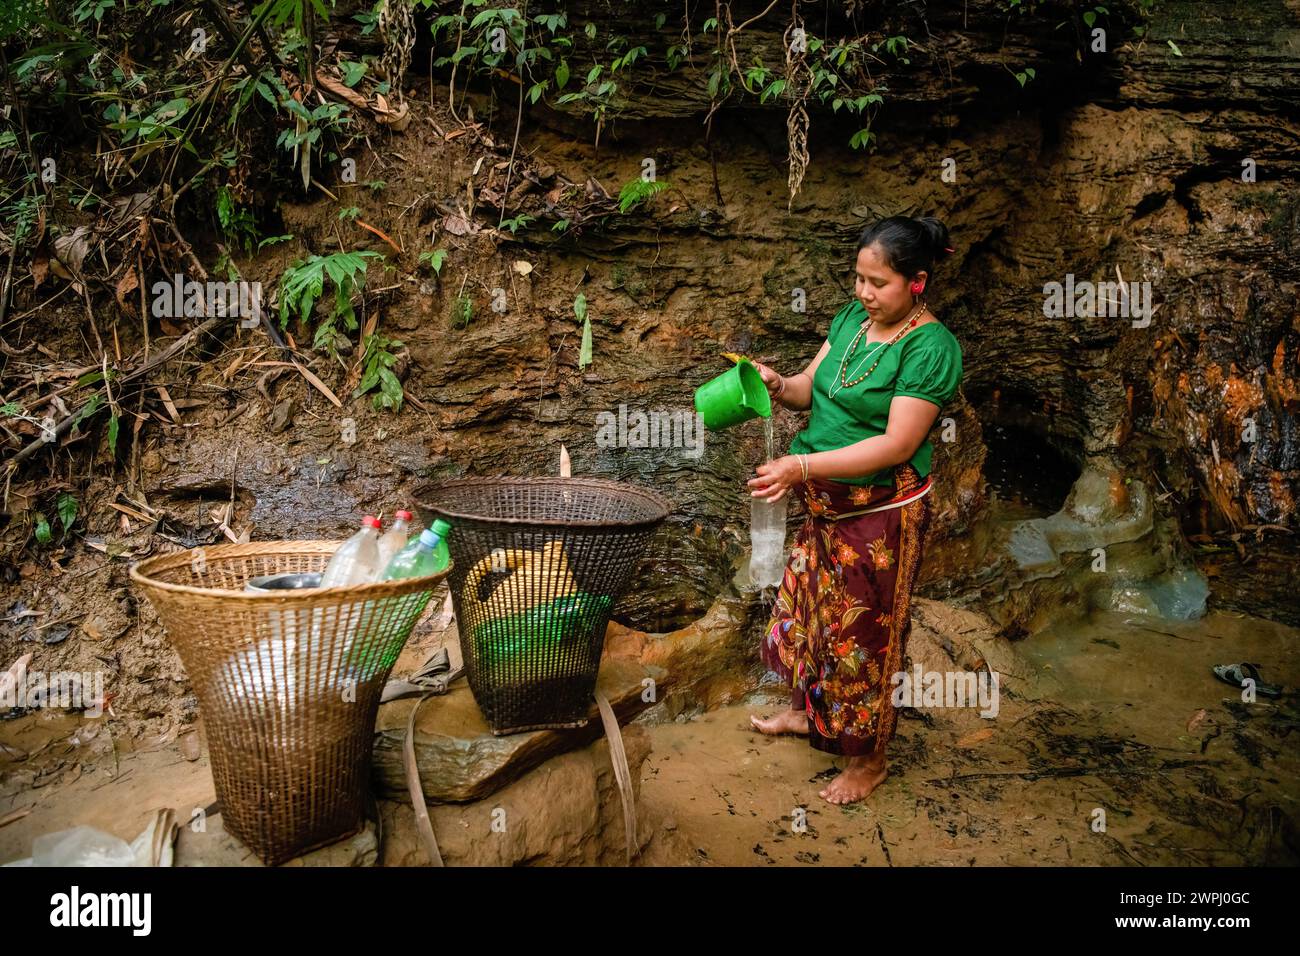 A Mro woman fetches drinking water from a mountain spring. Mro people are an indigenous ethnic group in Bangladesh. They primarily inhabit the Chittagong Hill Tracts (CHT) region, which includes districts such as Bandarban, Rangamati, and Khagrachari. The Mro people are one of the many indigenous communities in Bangladesh, and they have a distinct cultural identity, language, and traditional way of life. Stock Photo